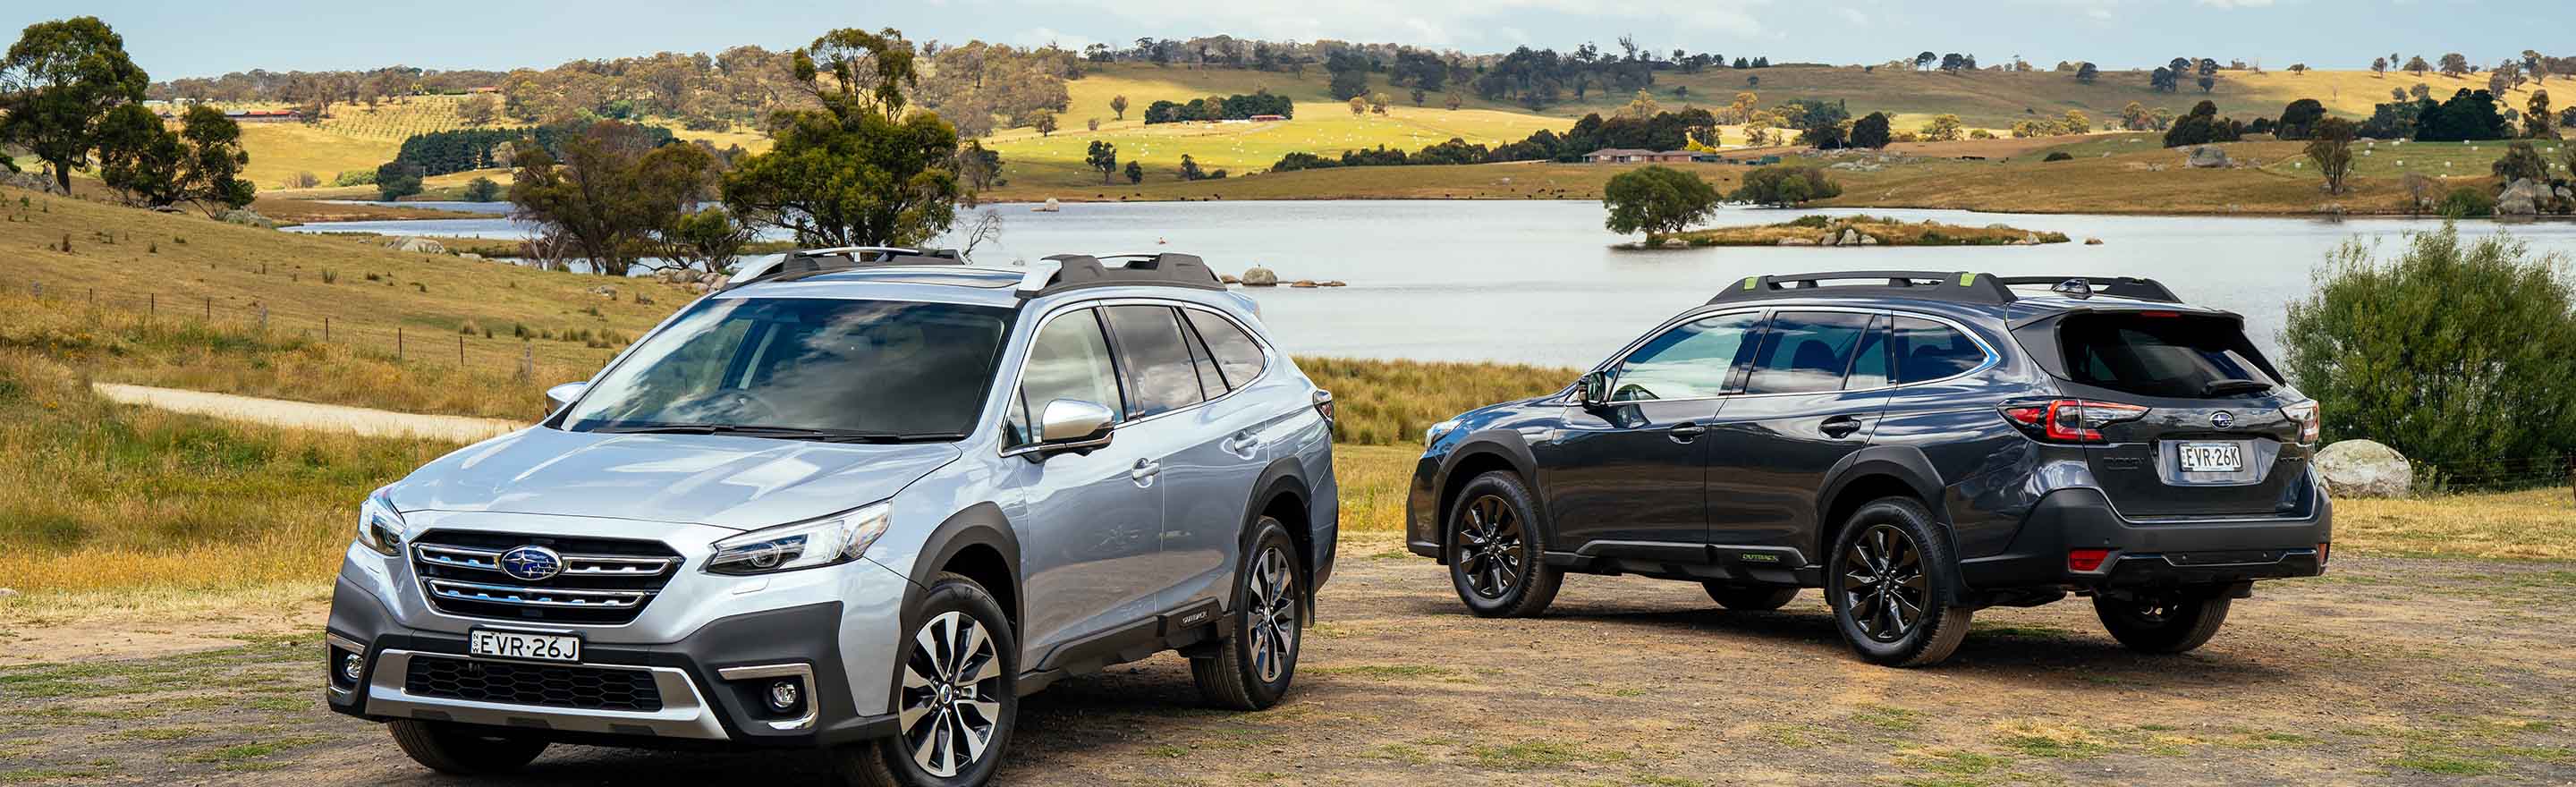 Performance meets adventure: Australian arrival of the highly anticipated turbocharged Subaru Outback